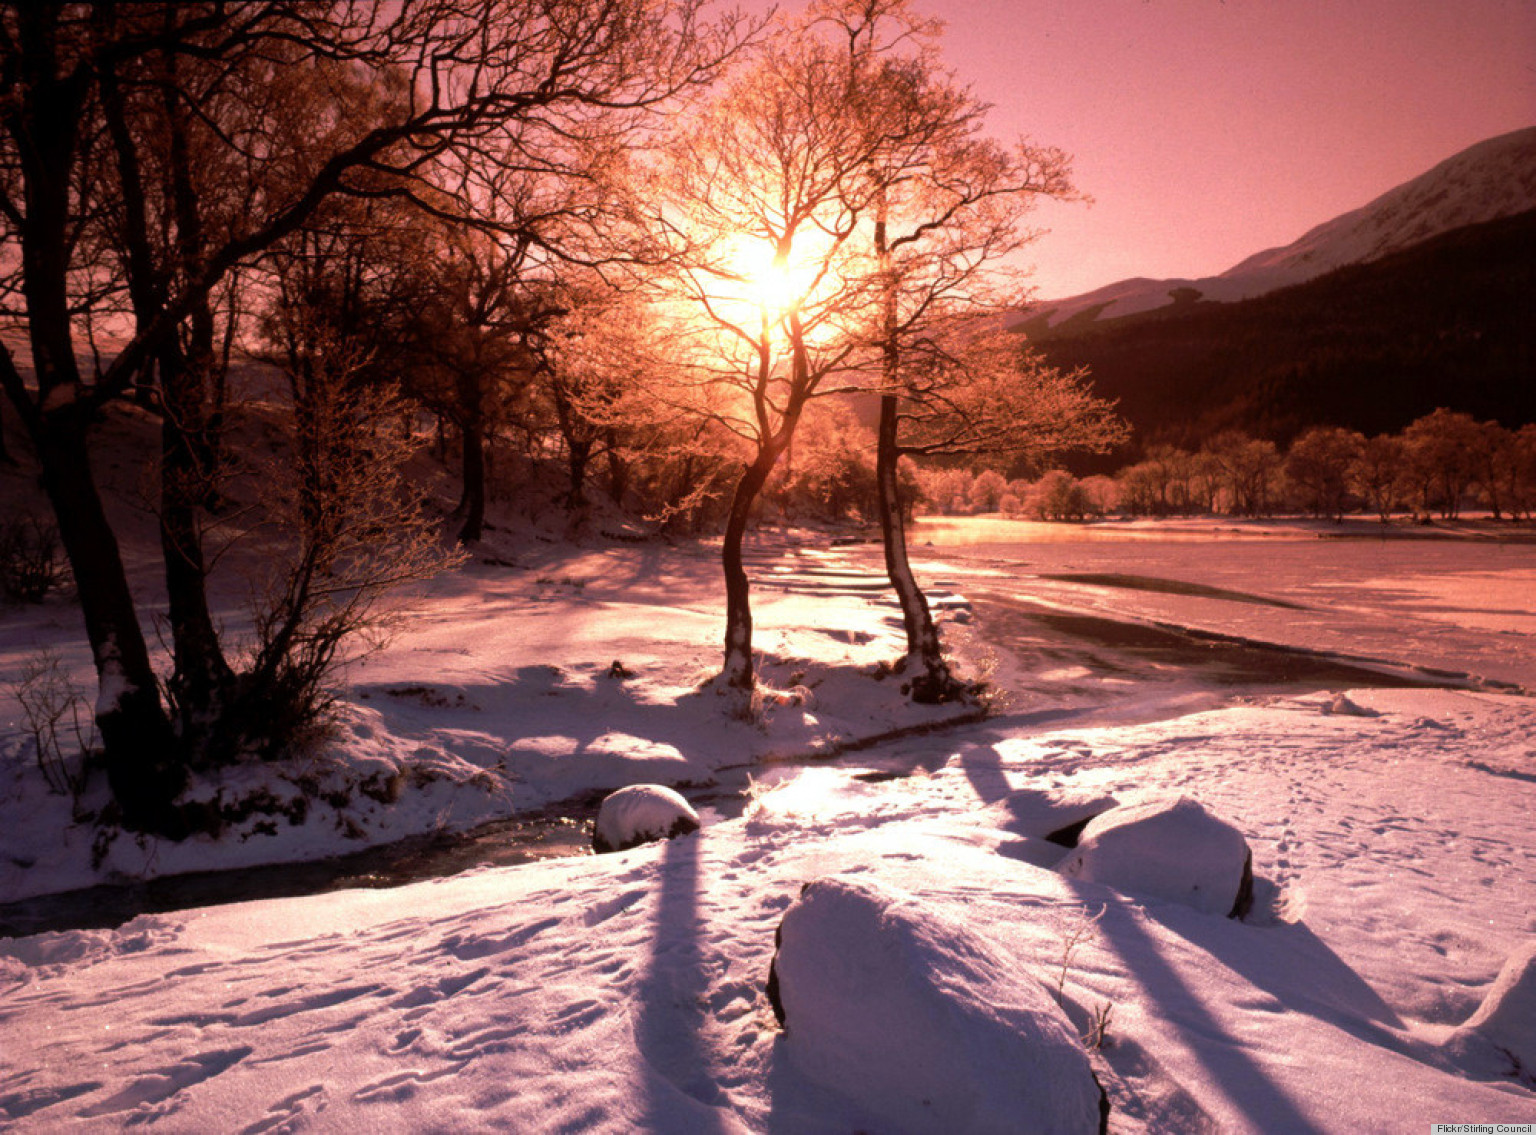 Winter Scenes That Make The Cold Weather Seem Not So Bad (PHOTOS